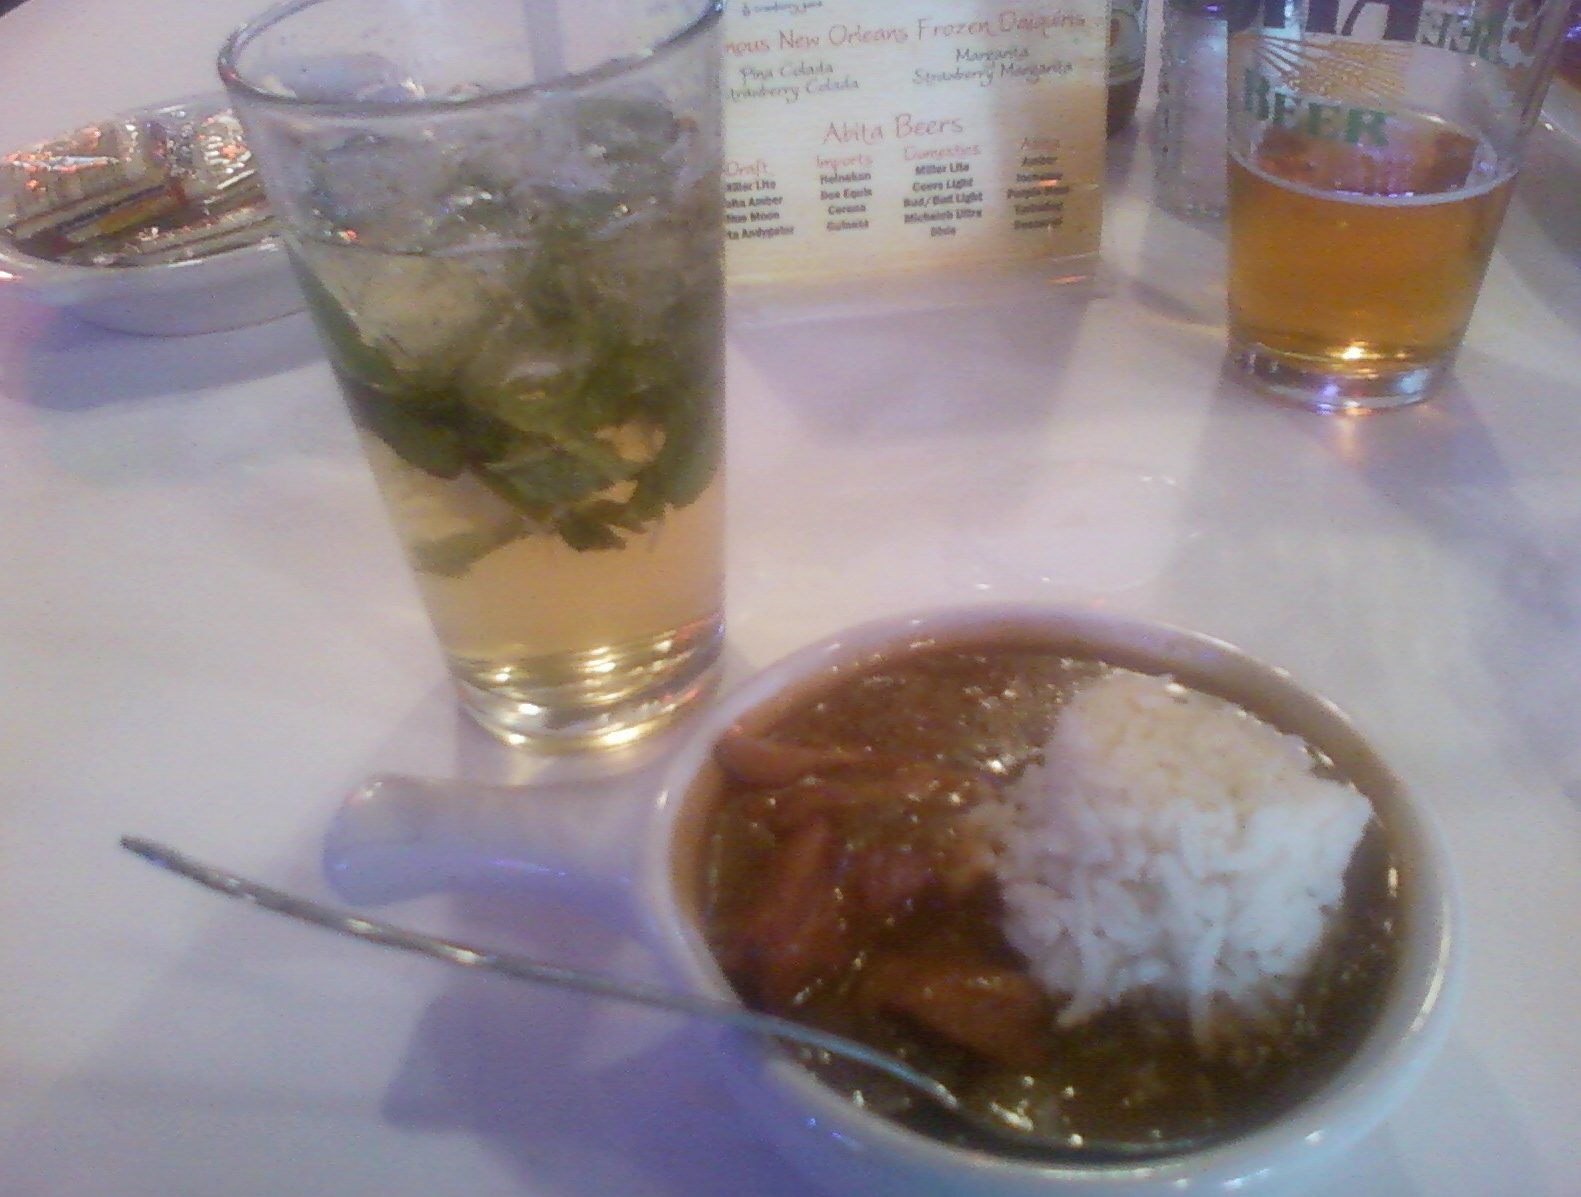 Mint julep and gumbo in New Orleans